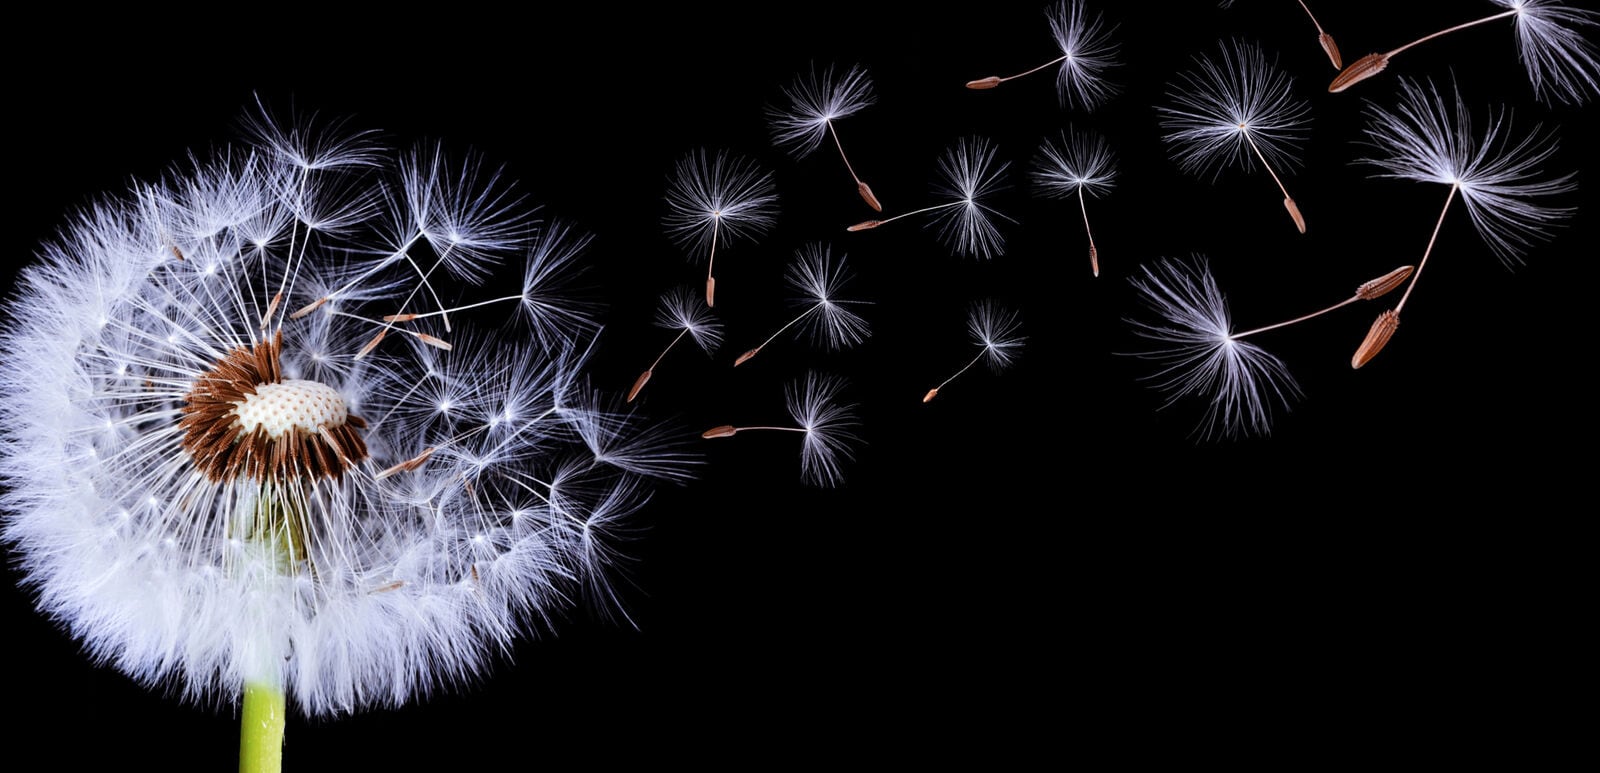 Dandelion seeds blowing away, representing the delicate oocyte maturation and fertility process.